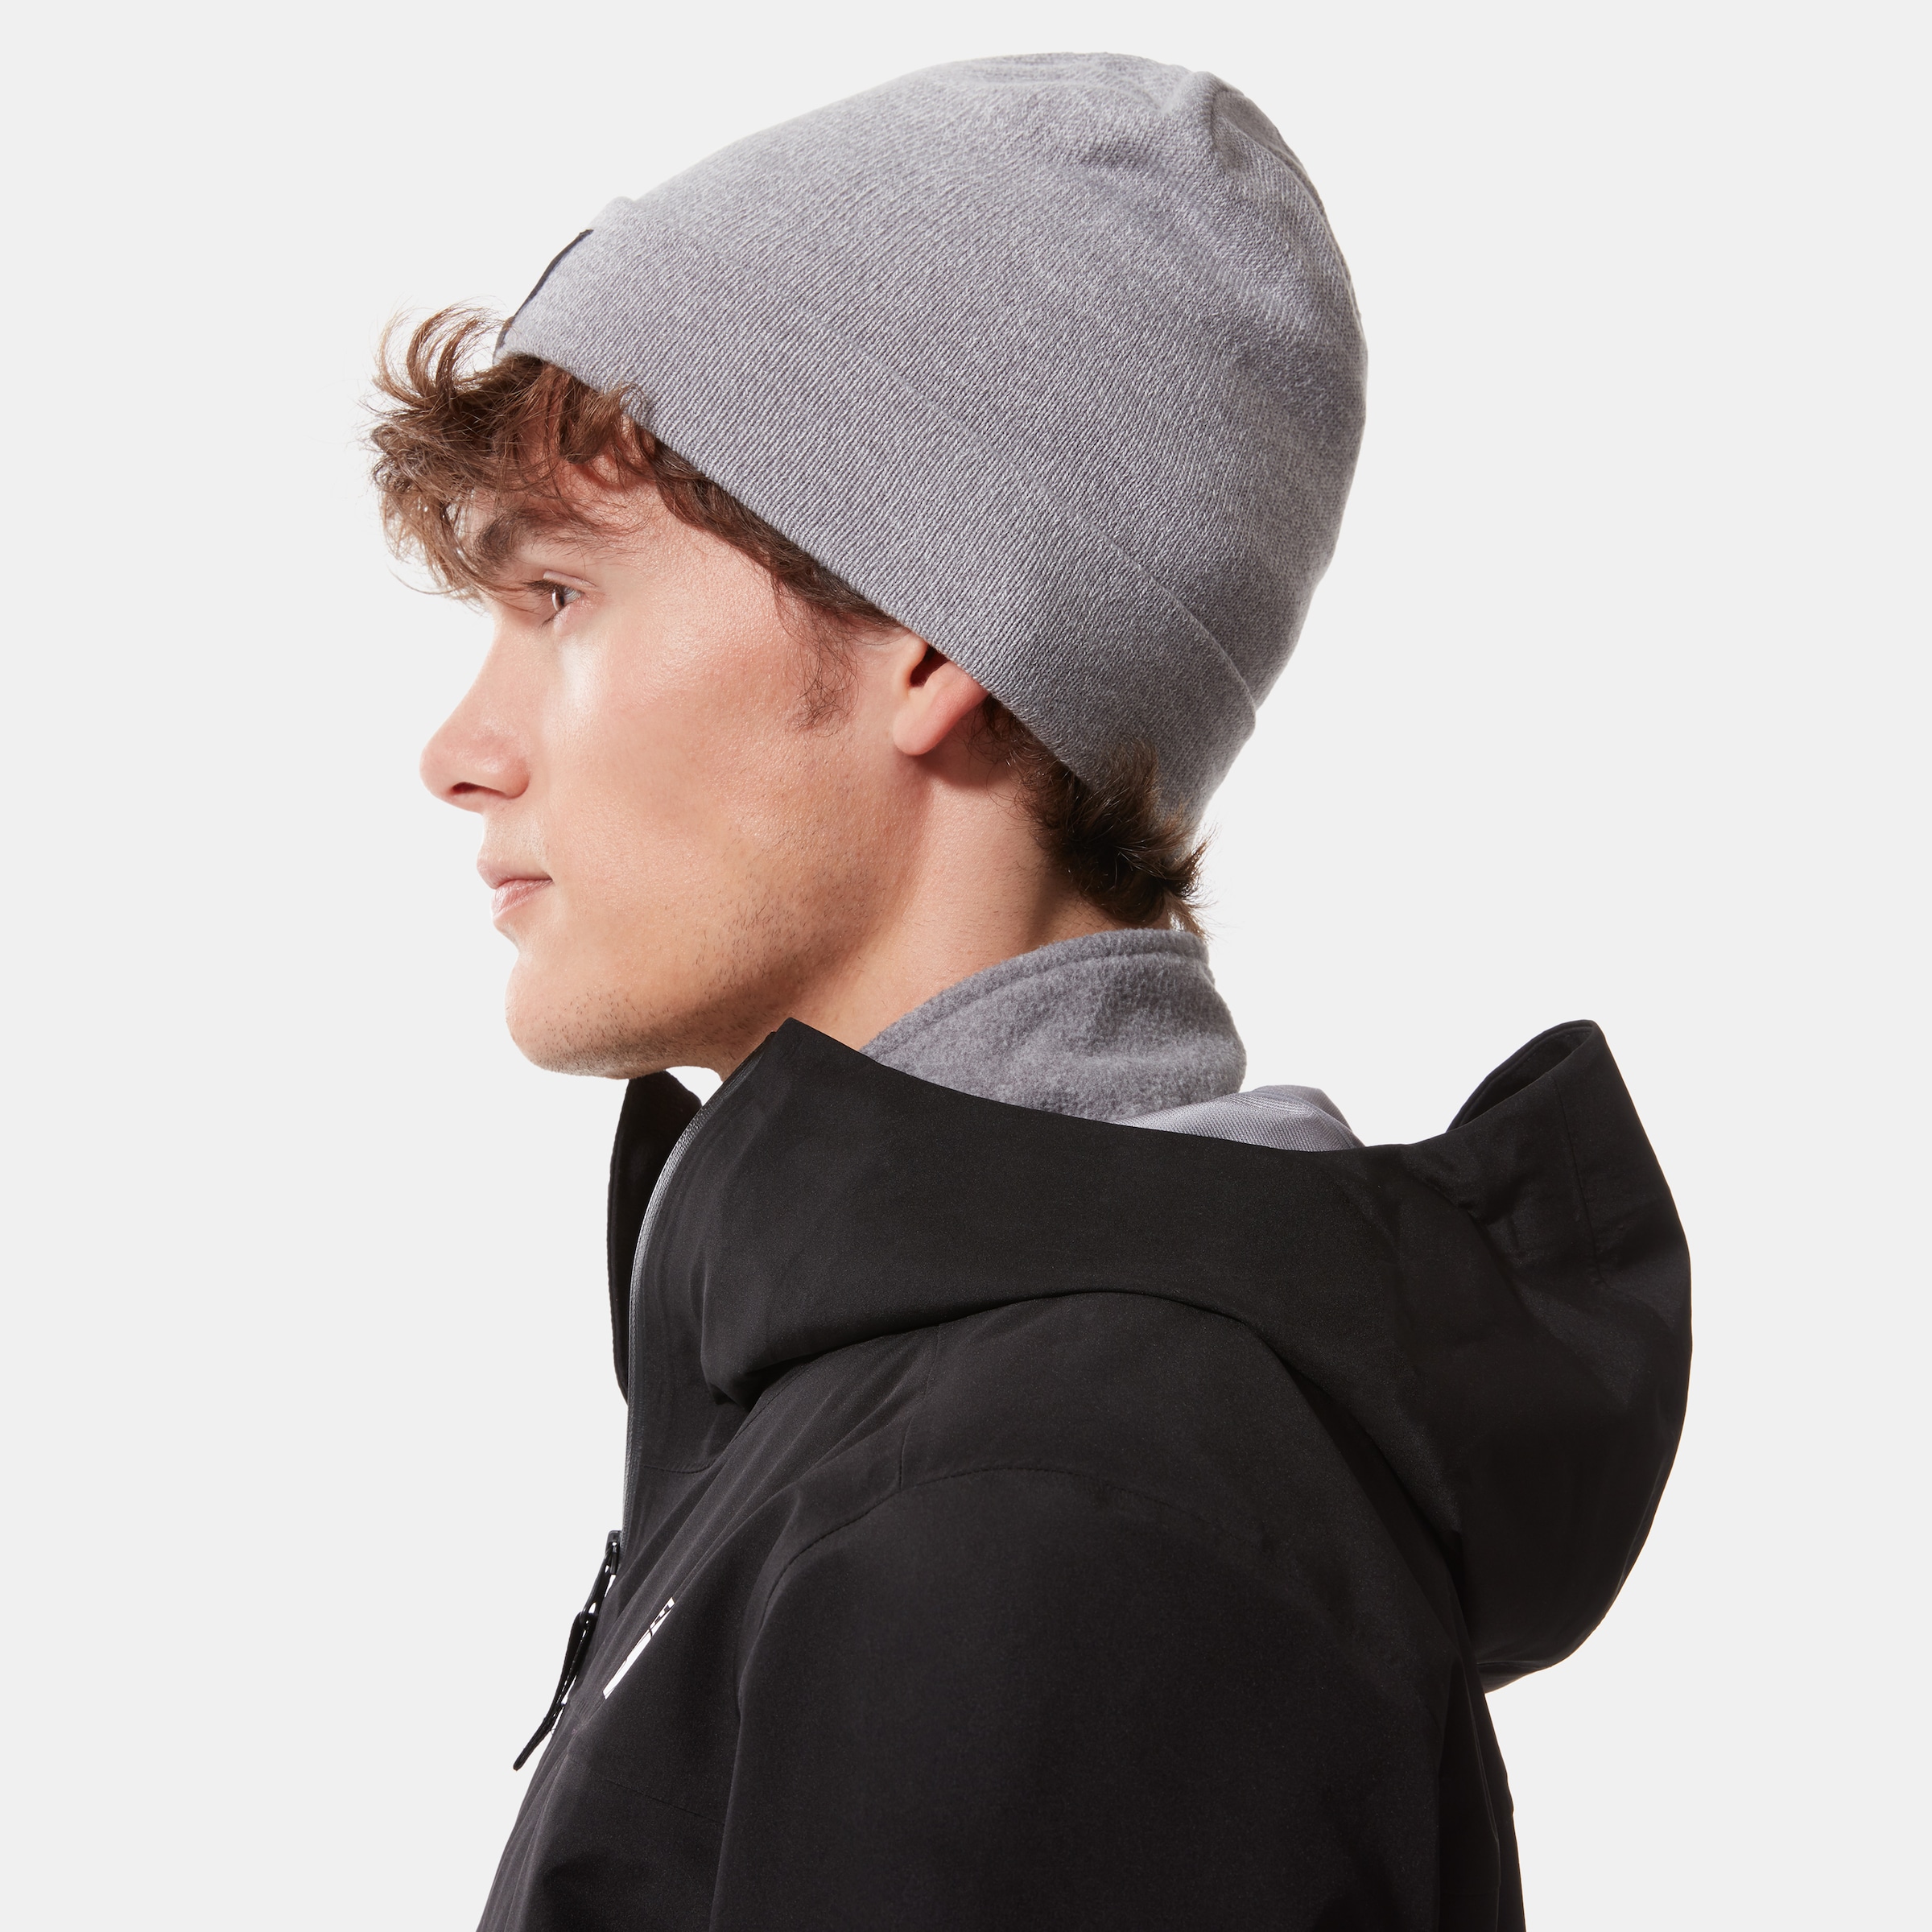 The North Face Beanie »DOCK WORKER RECYCLED BEANIE«, mit Logolabel